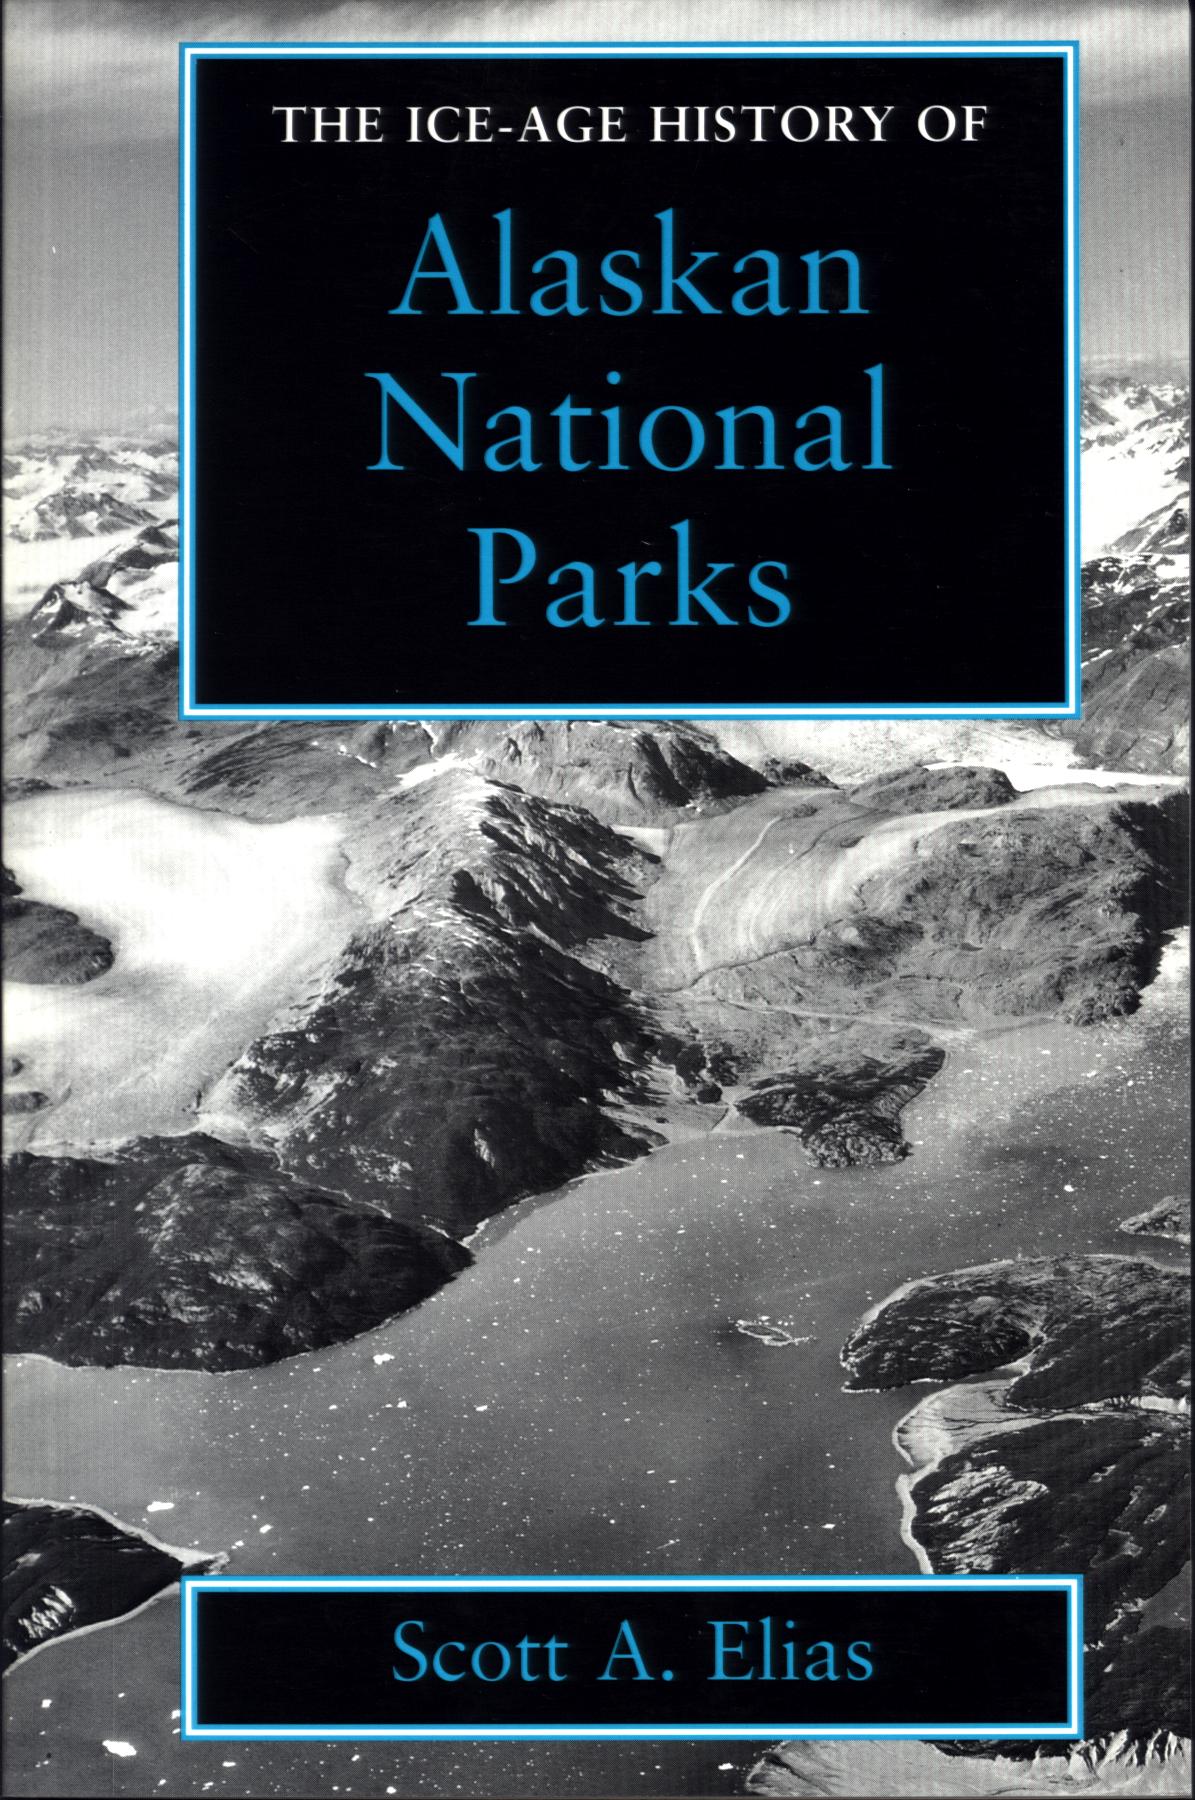 THE ICE-AGE HISTORY OF ALASKAN NATIONAL PARKS.